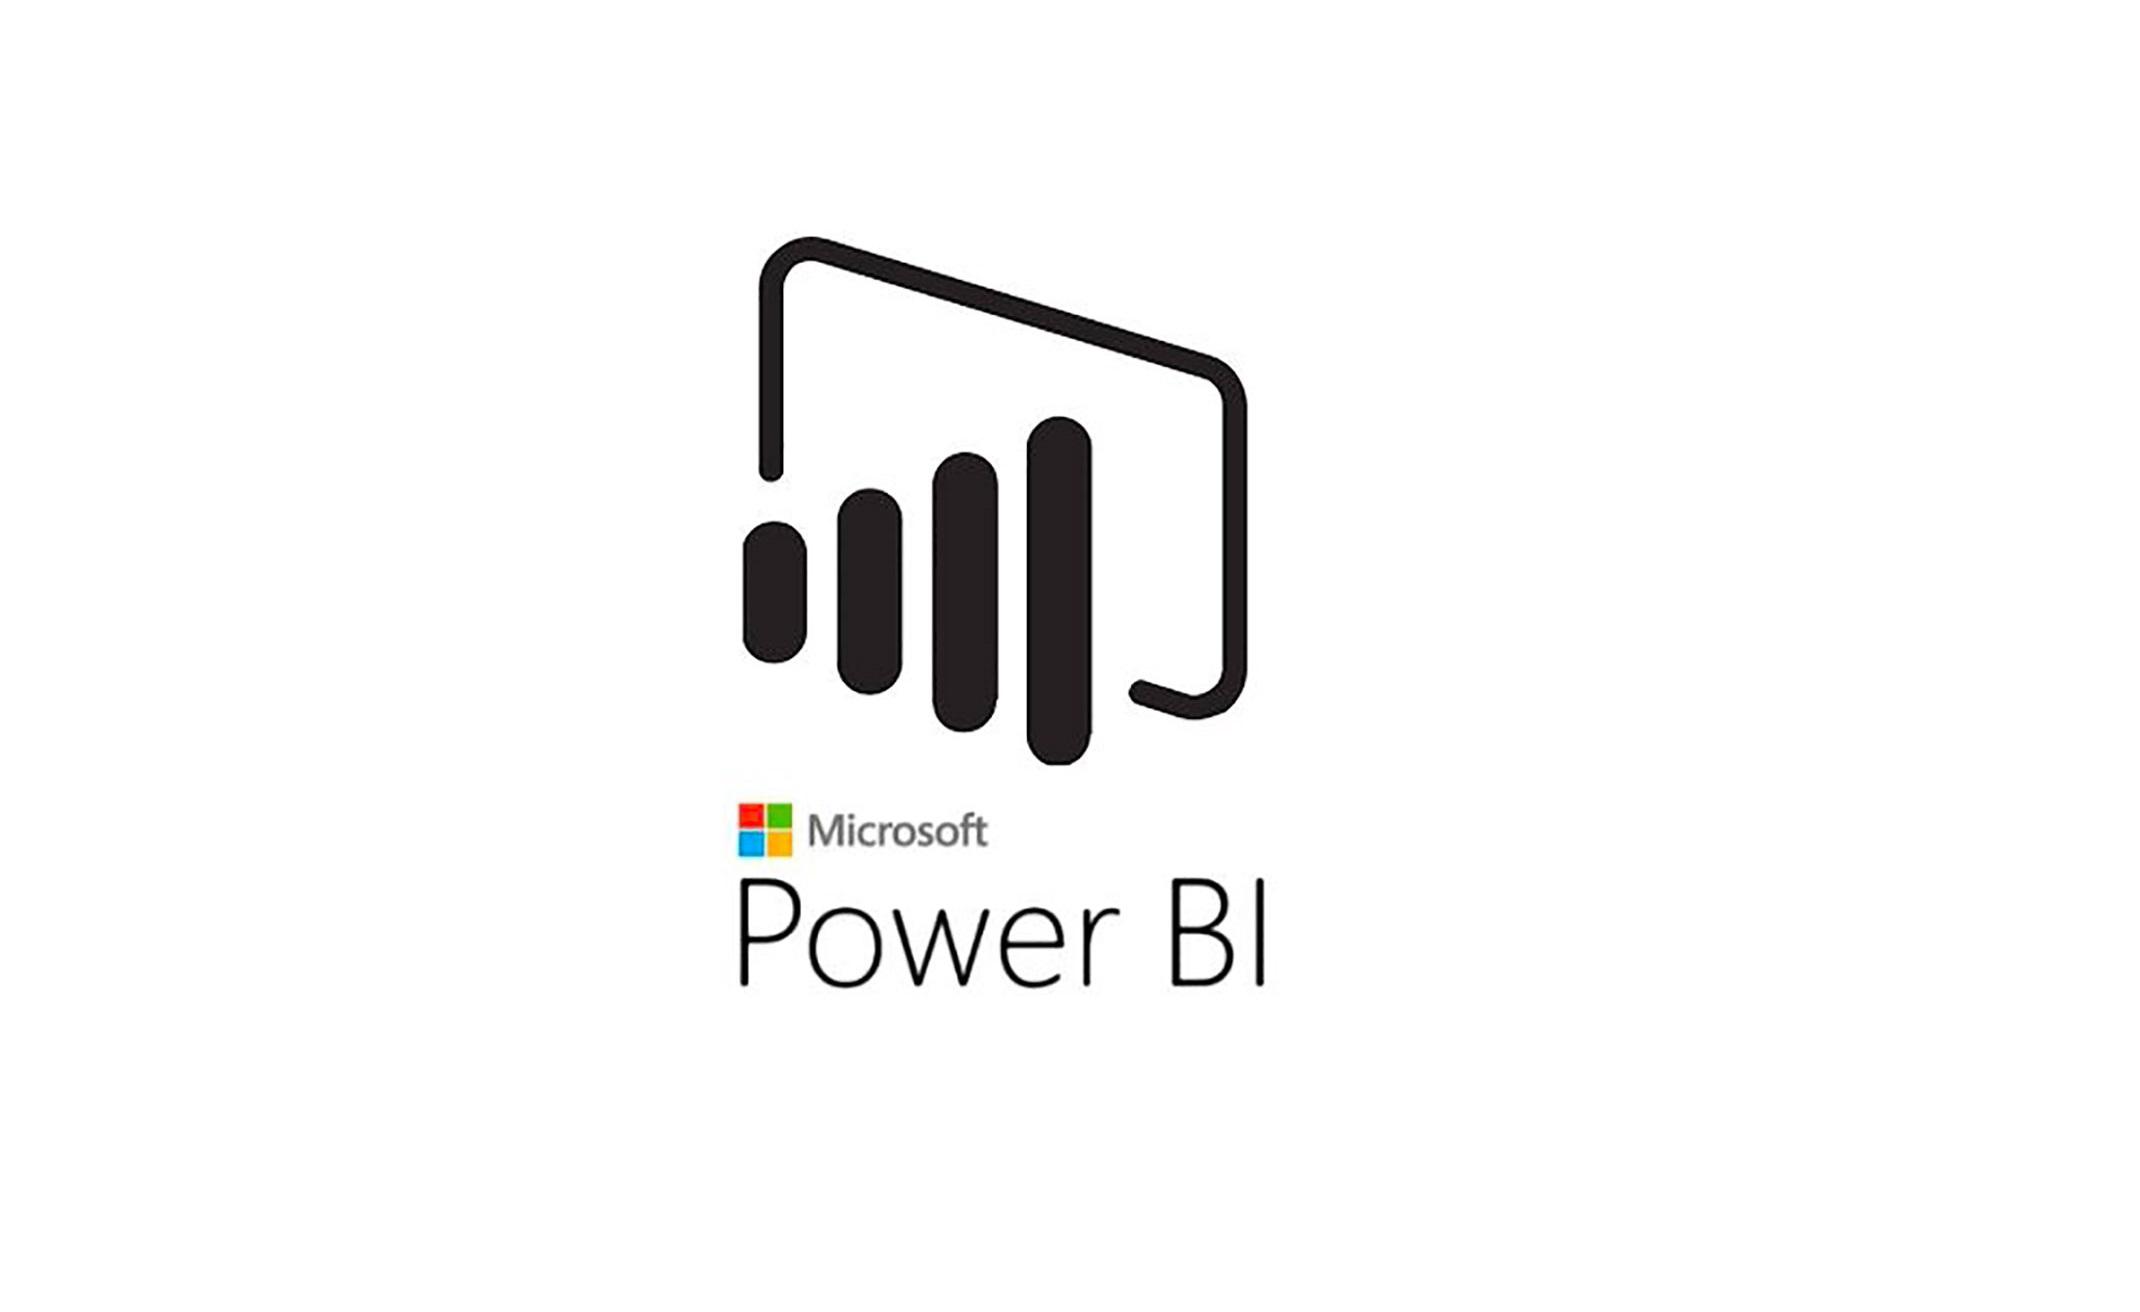 4 Weeks Microsoft Power BI Training in Chula Vista | Introduction to Power BI training for beginners | Getting started with Power BI | What is Power BI | March 30, 2020 - April 22, 2020